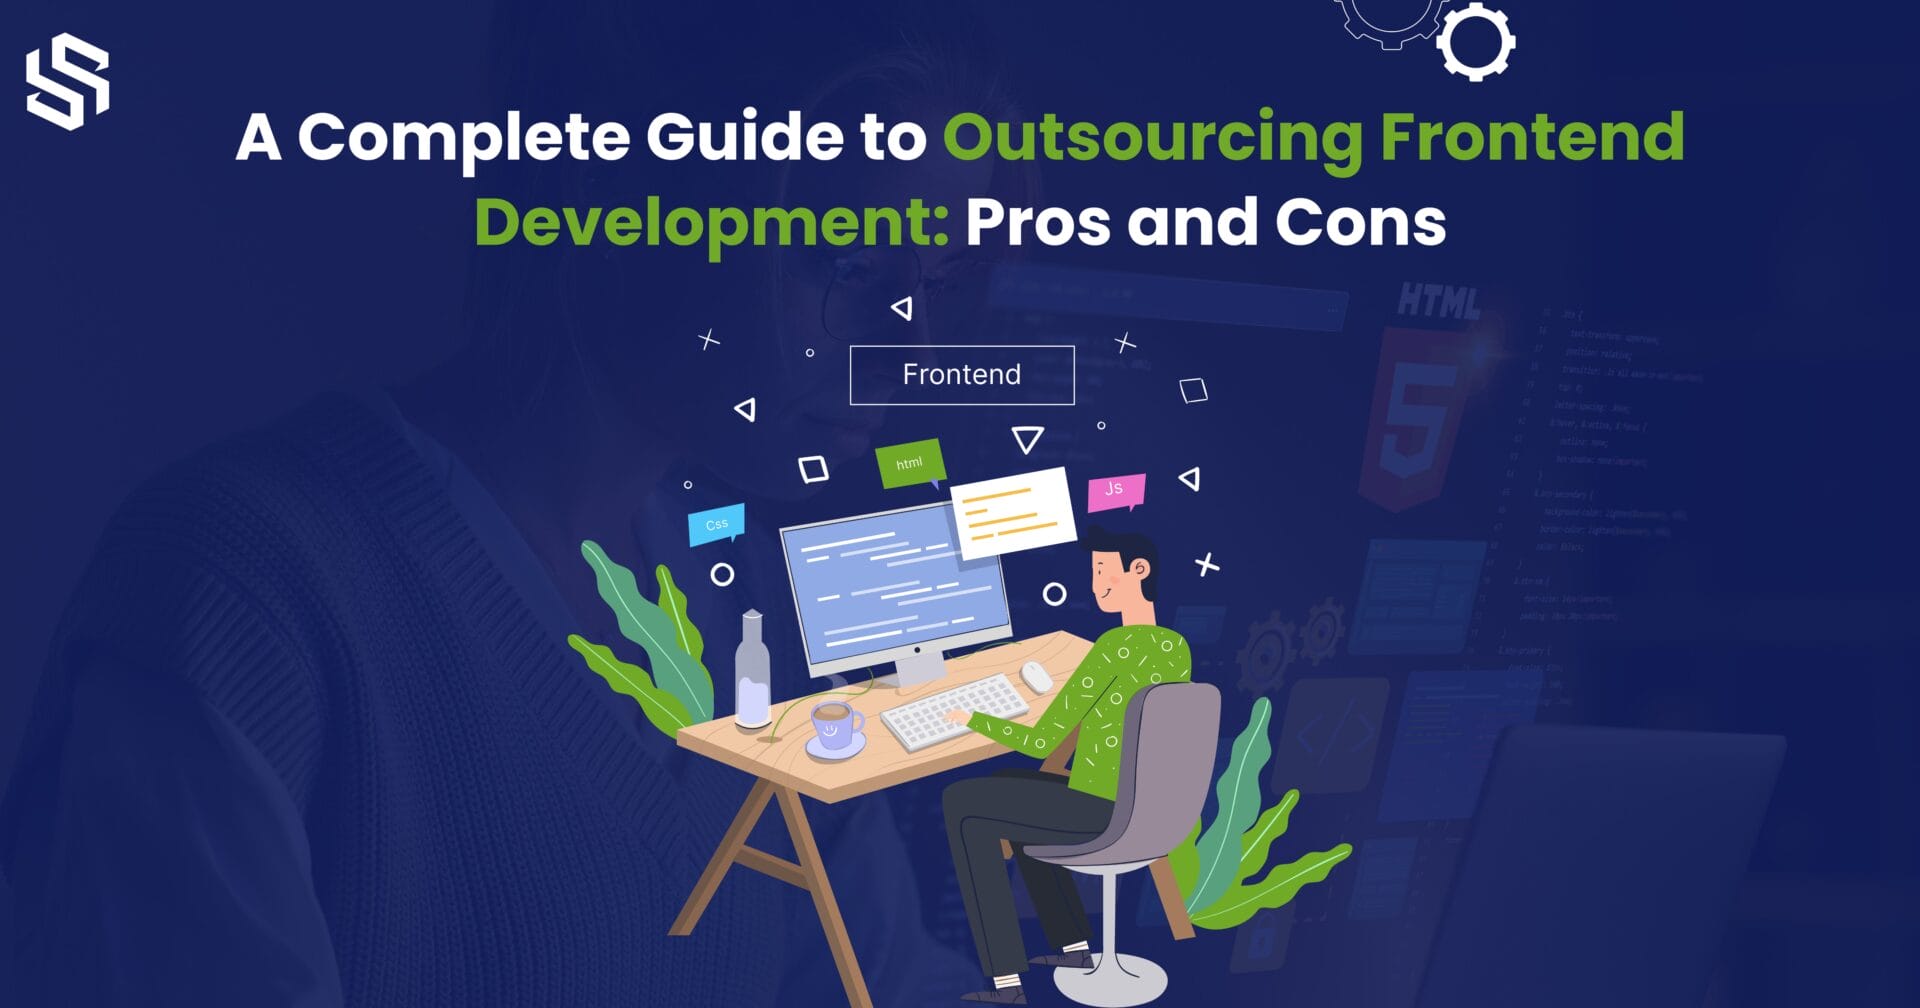 A Complete Guide to Outsourcing Frontend Development - Pros and Cons